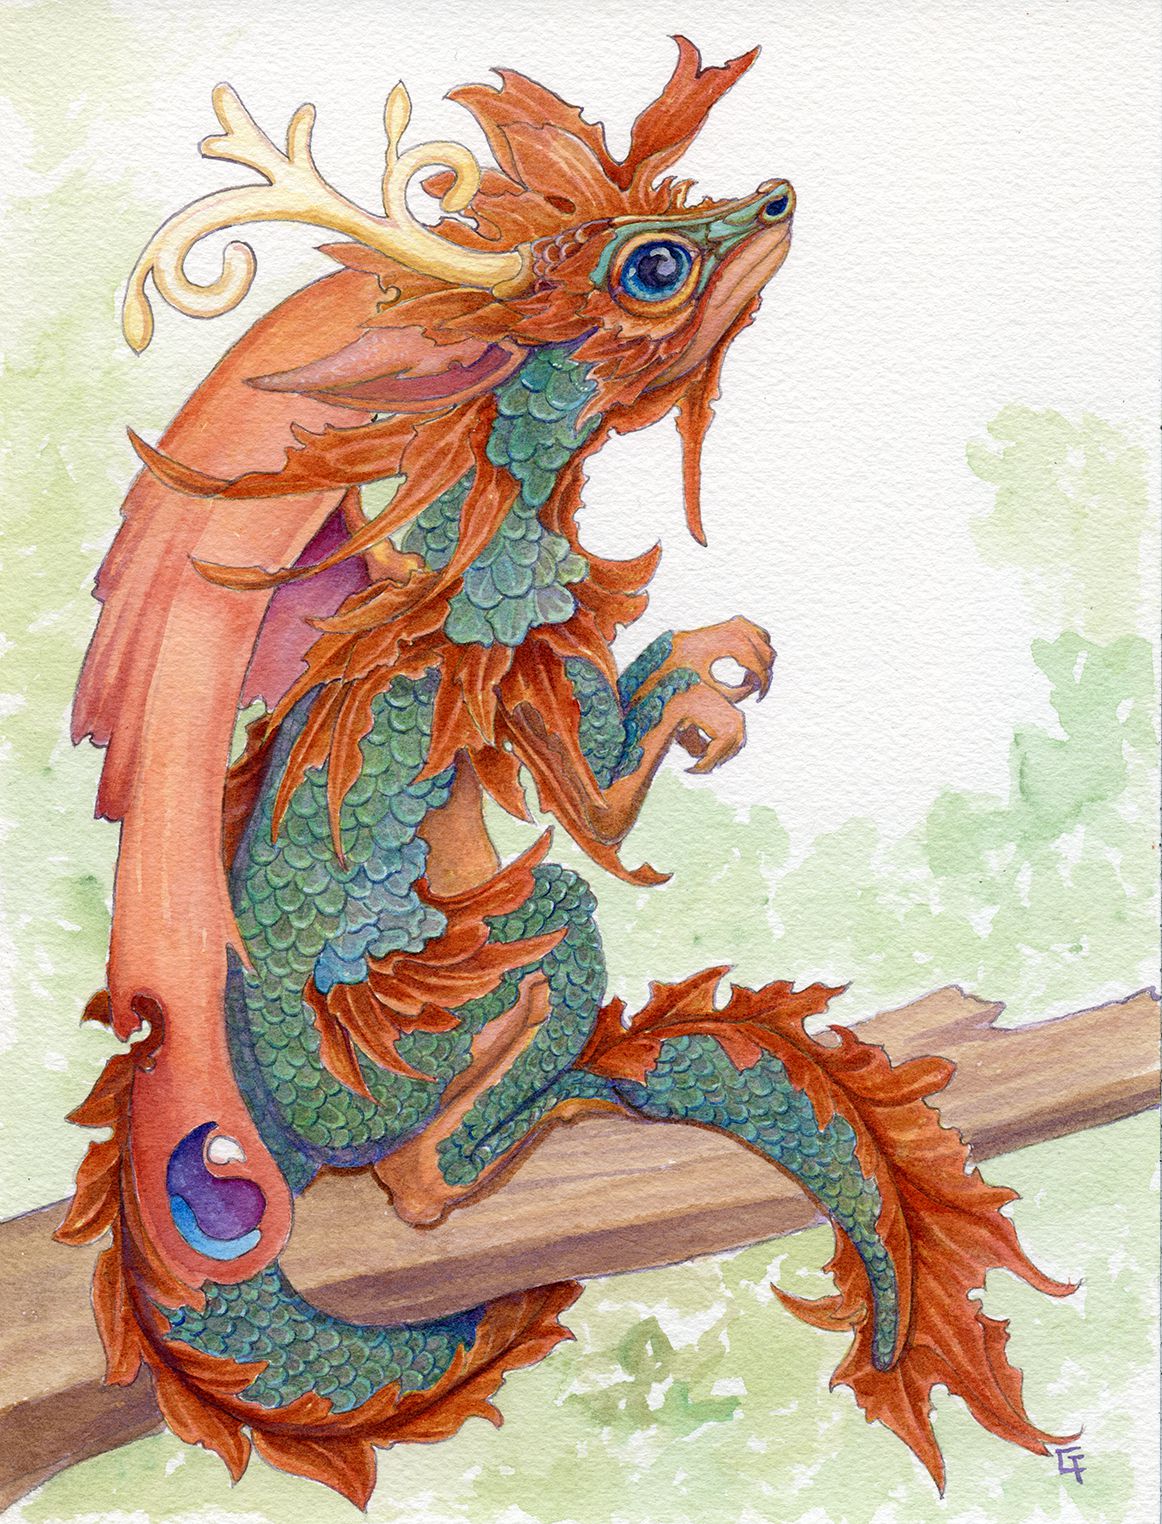 Unique And Wonderful Dragons Watercolors By Carrieann Truitt 4